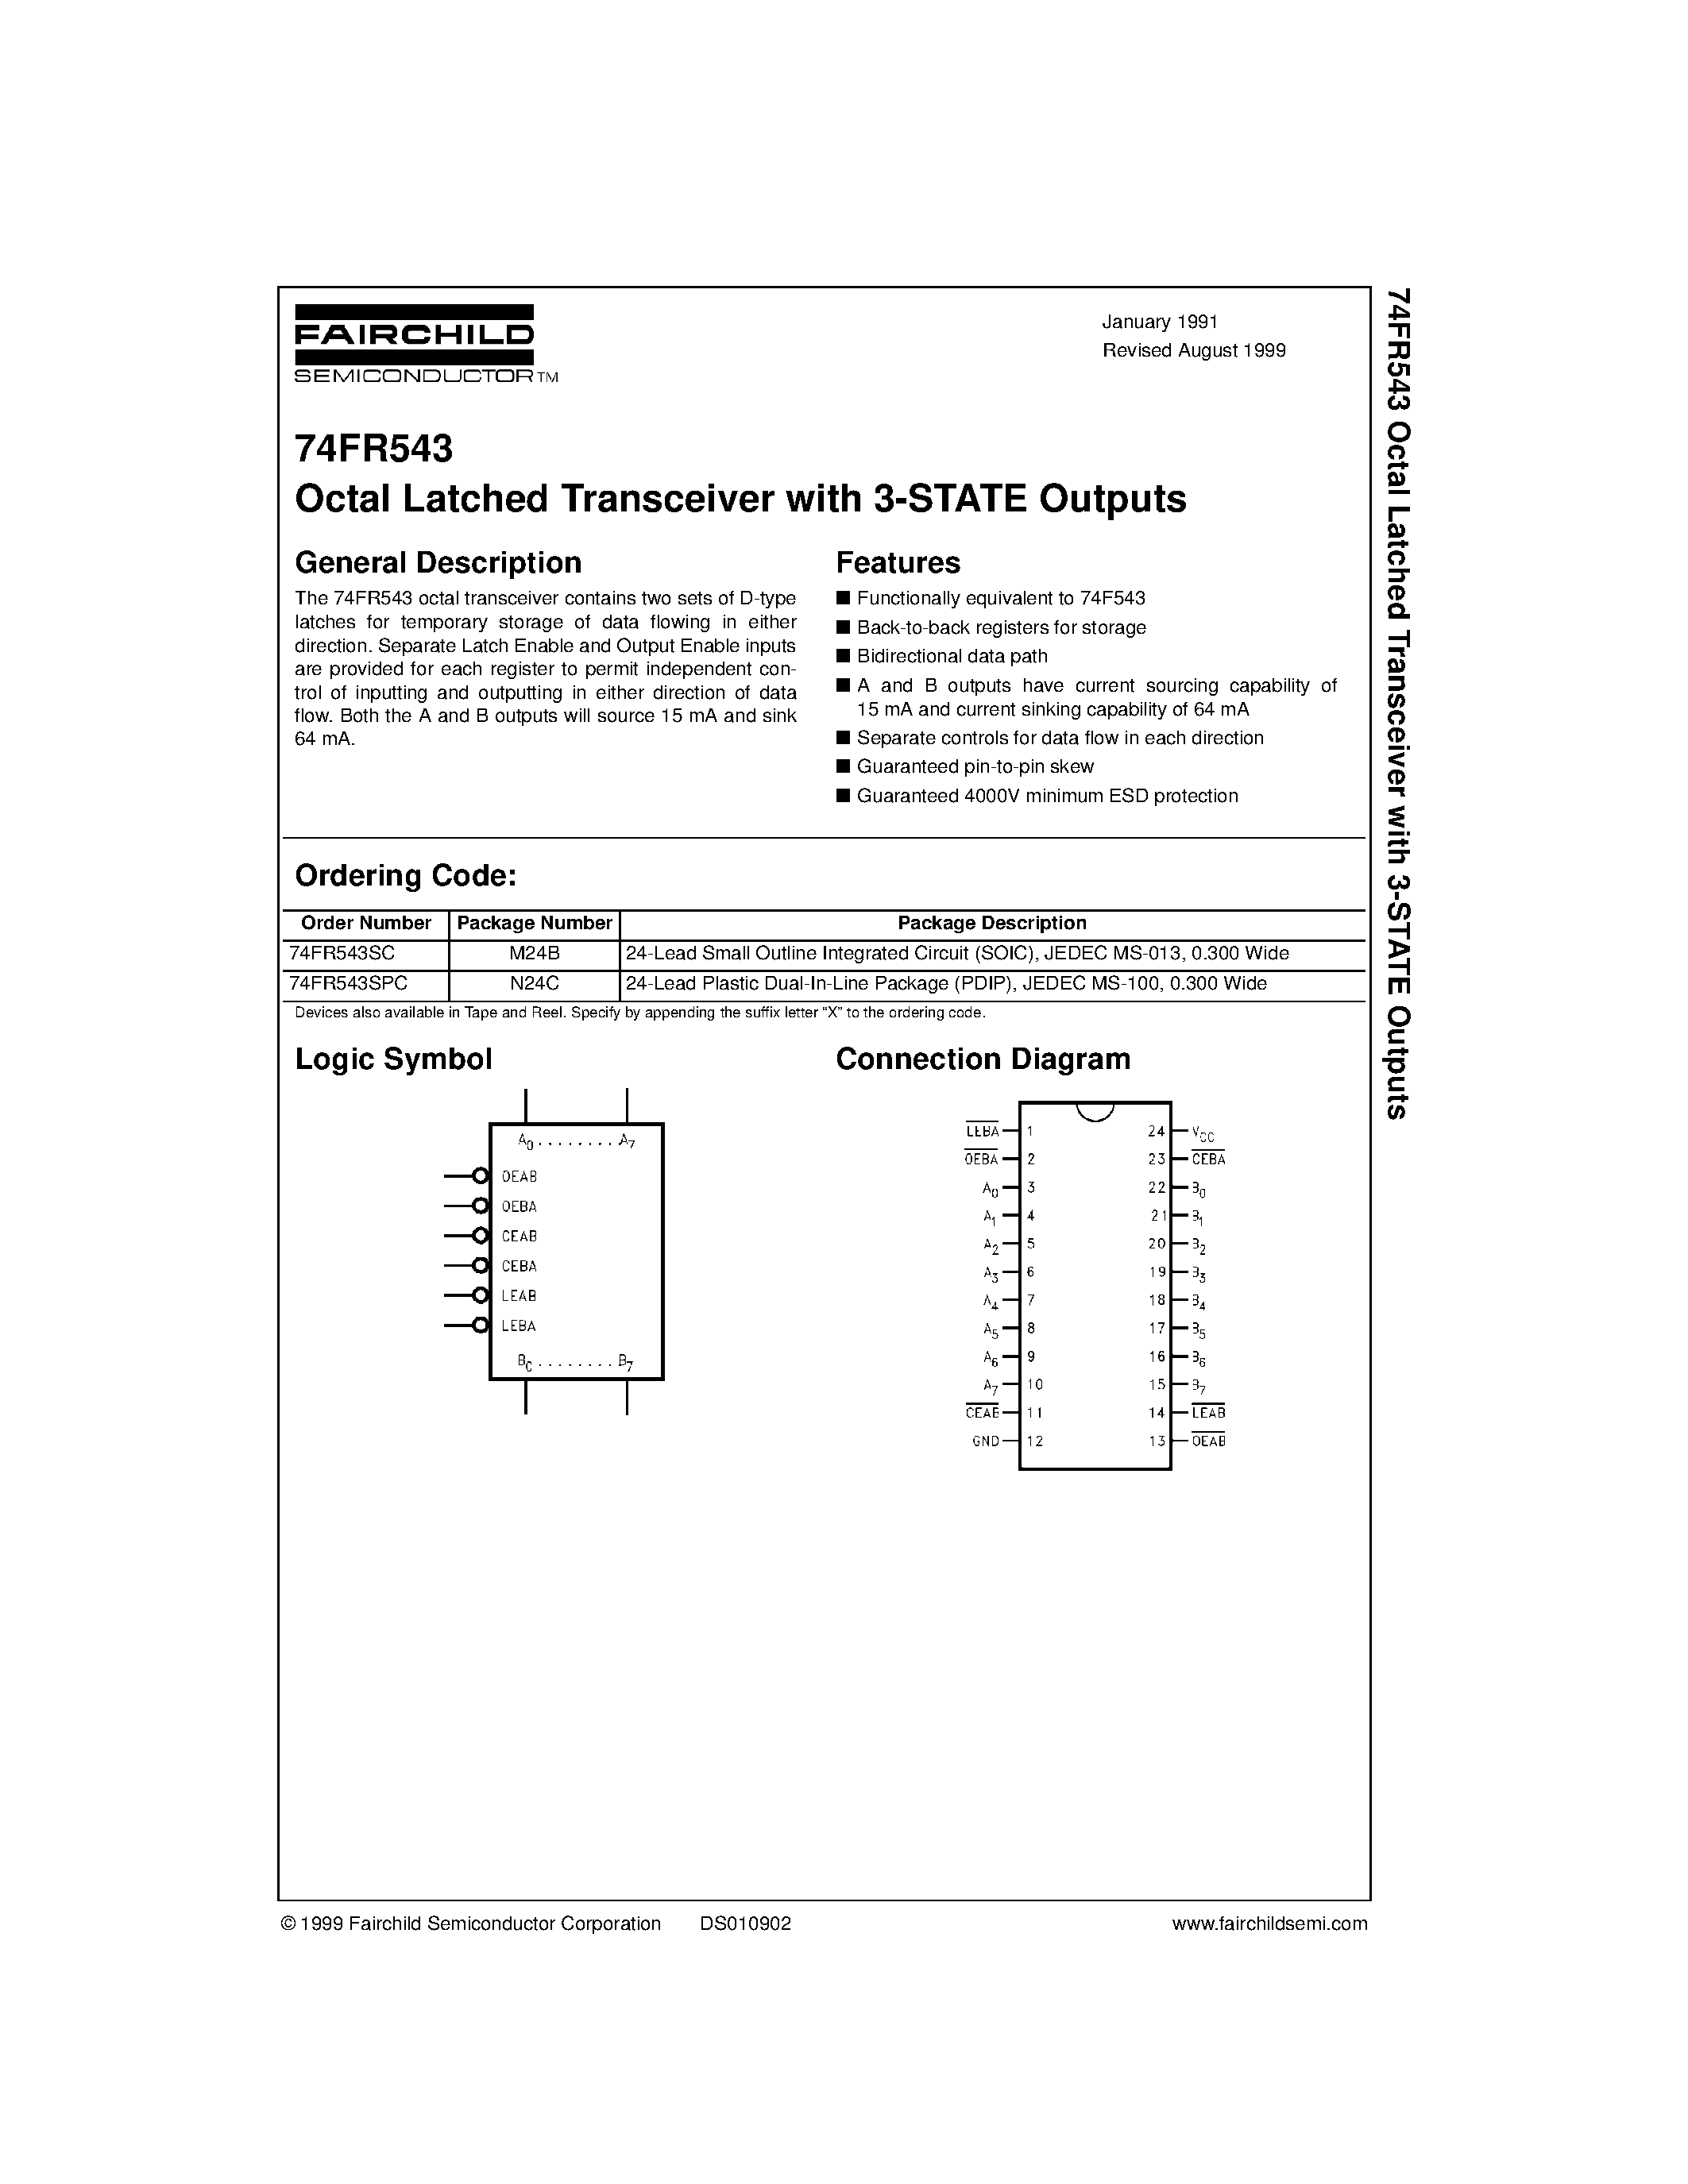 Datasheet 74FR543 - Octal Latched Transceiver with 3-STATE Outputs page 1